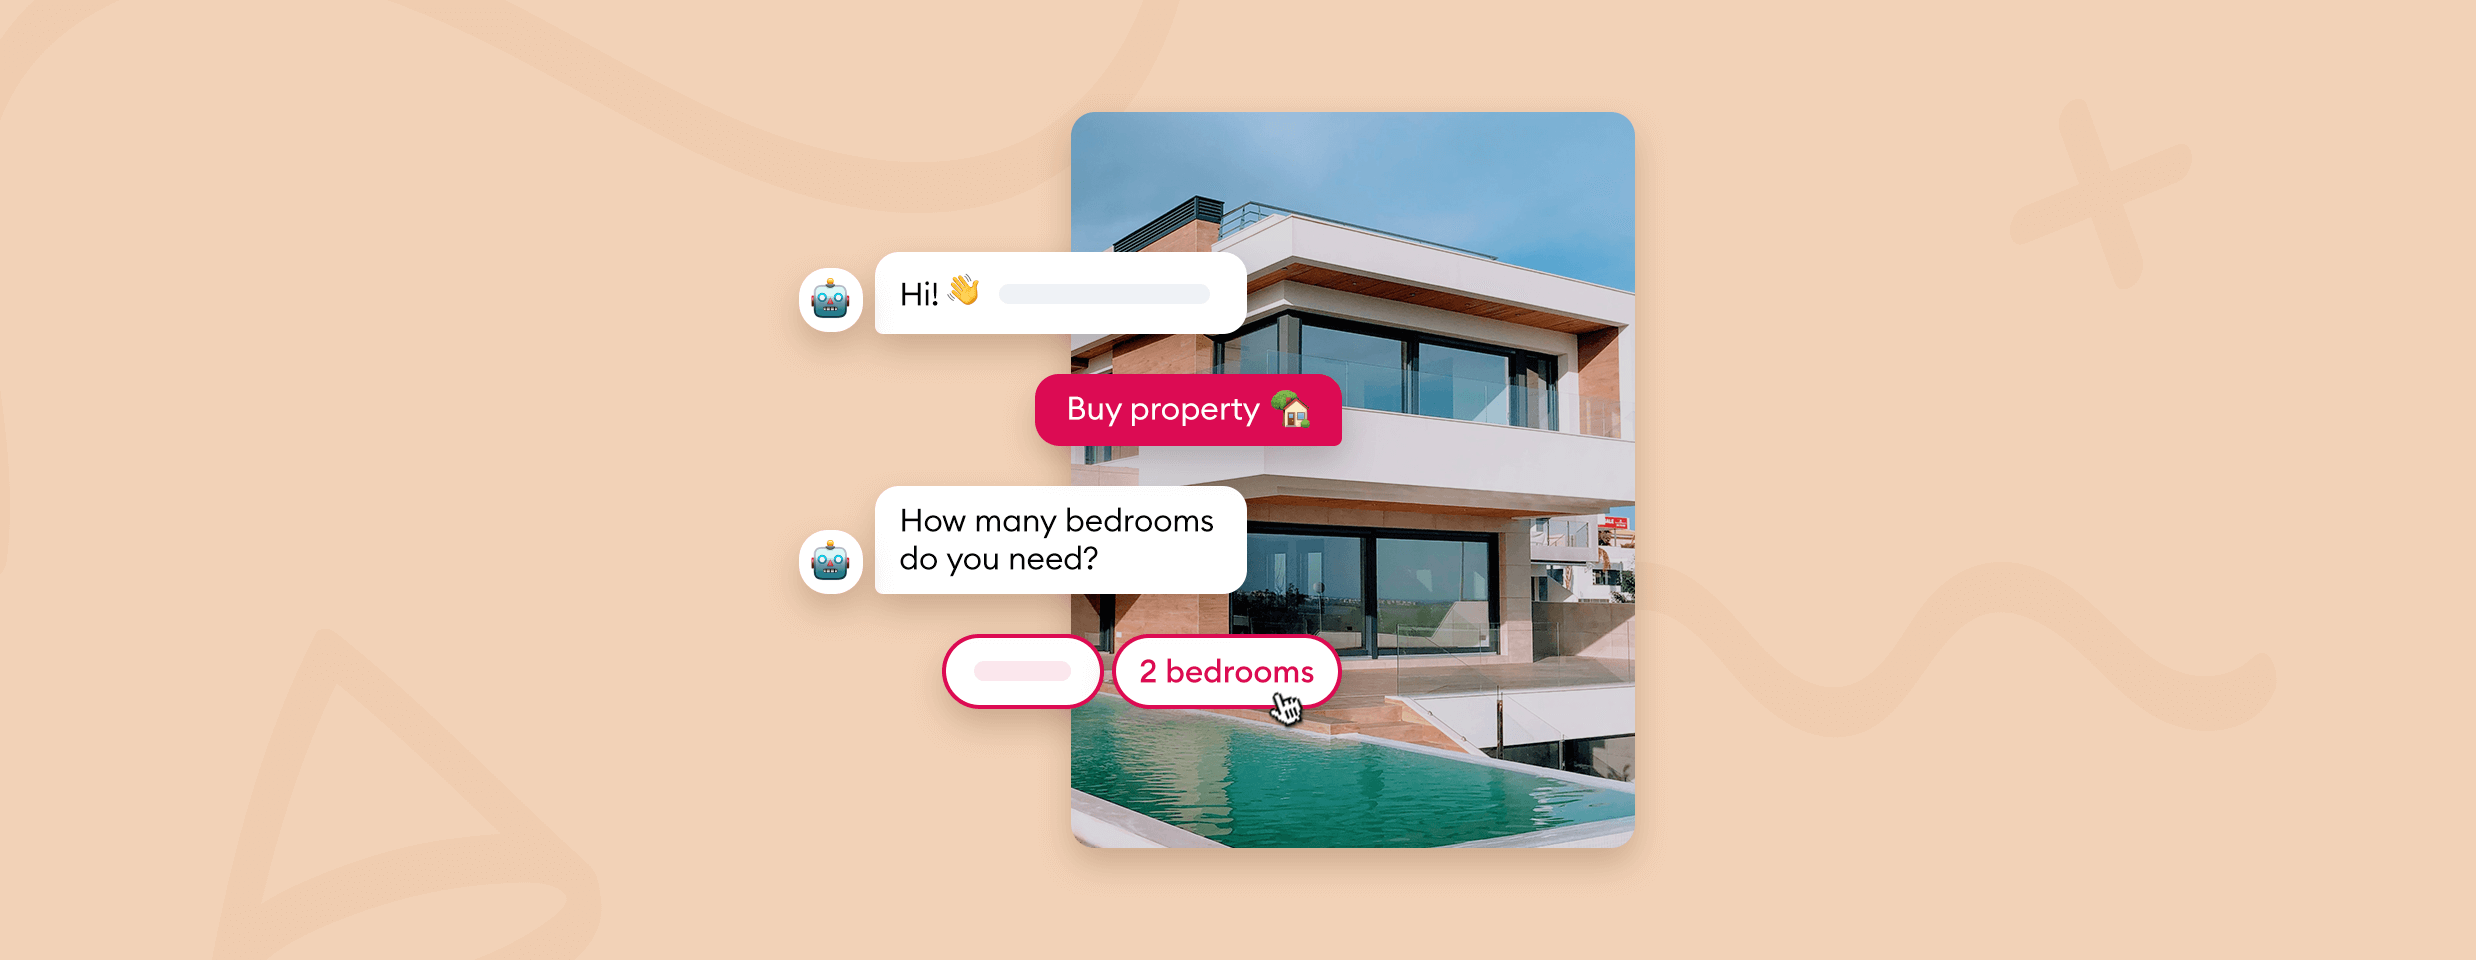 real estate chatbots cover image